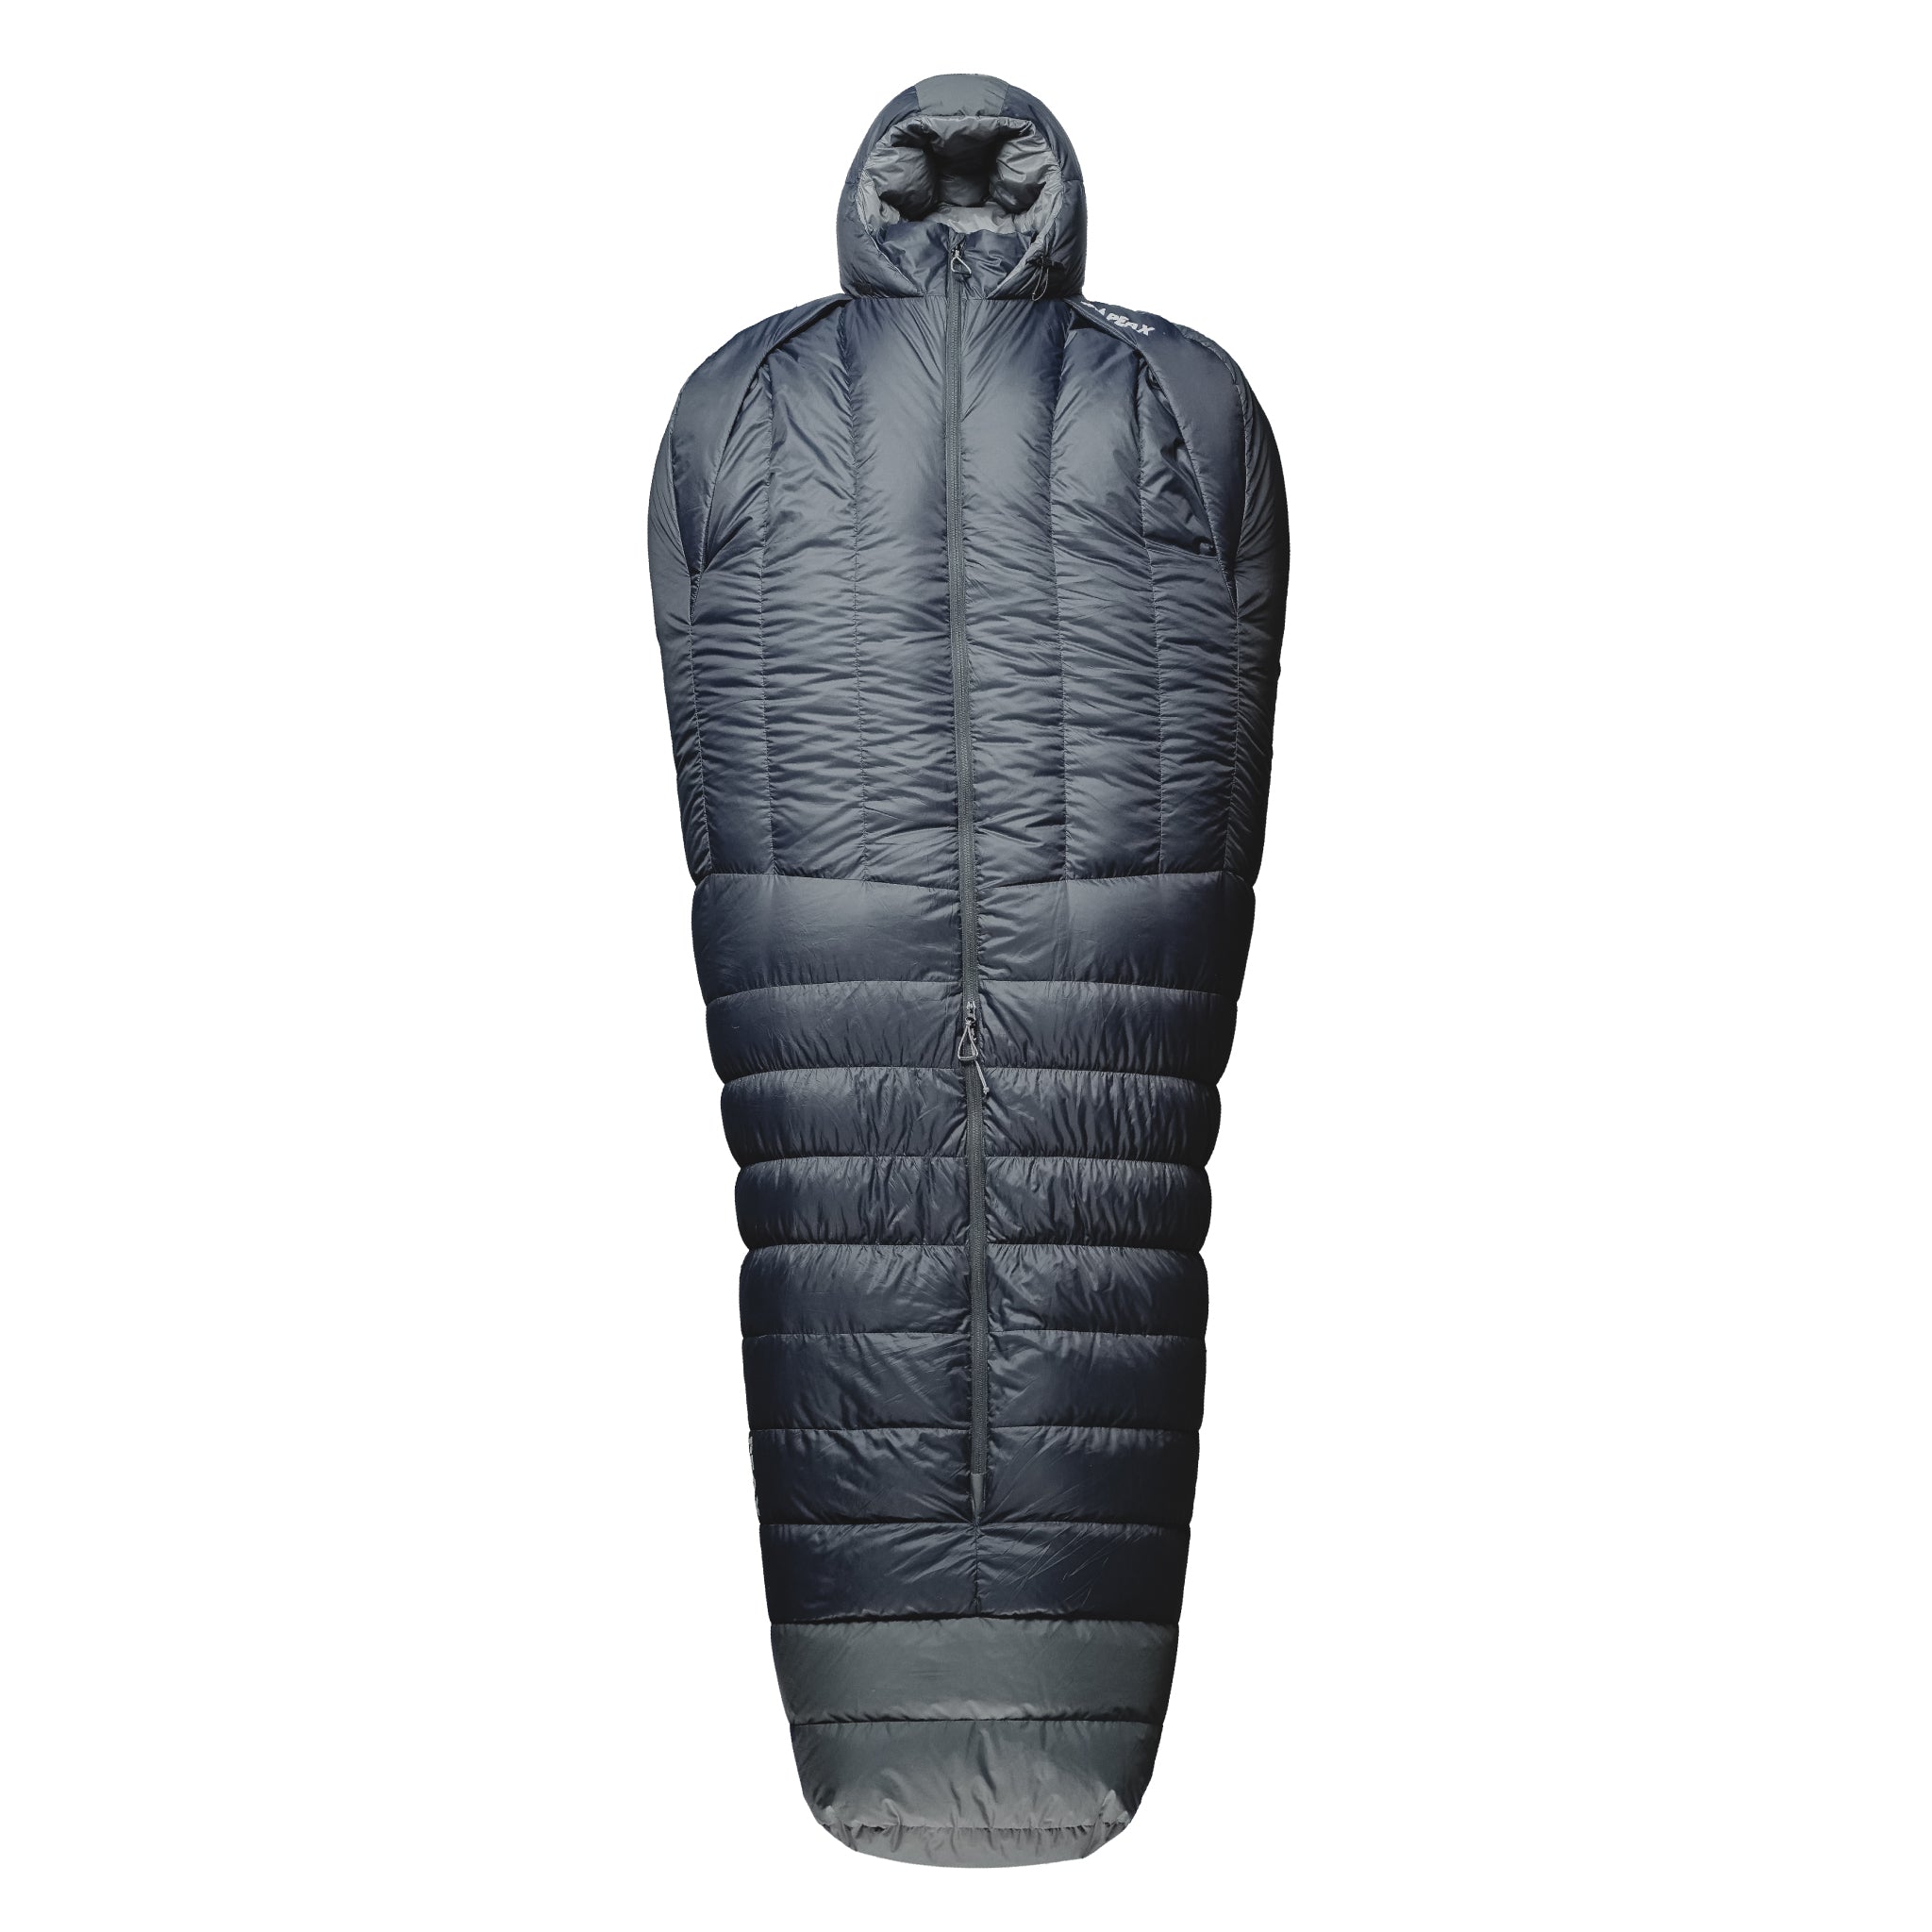 Solace 15 Hunting Sleeping Bag by PEAX